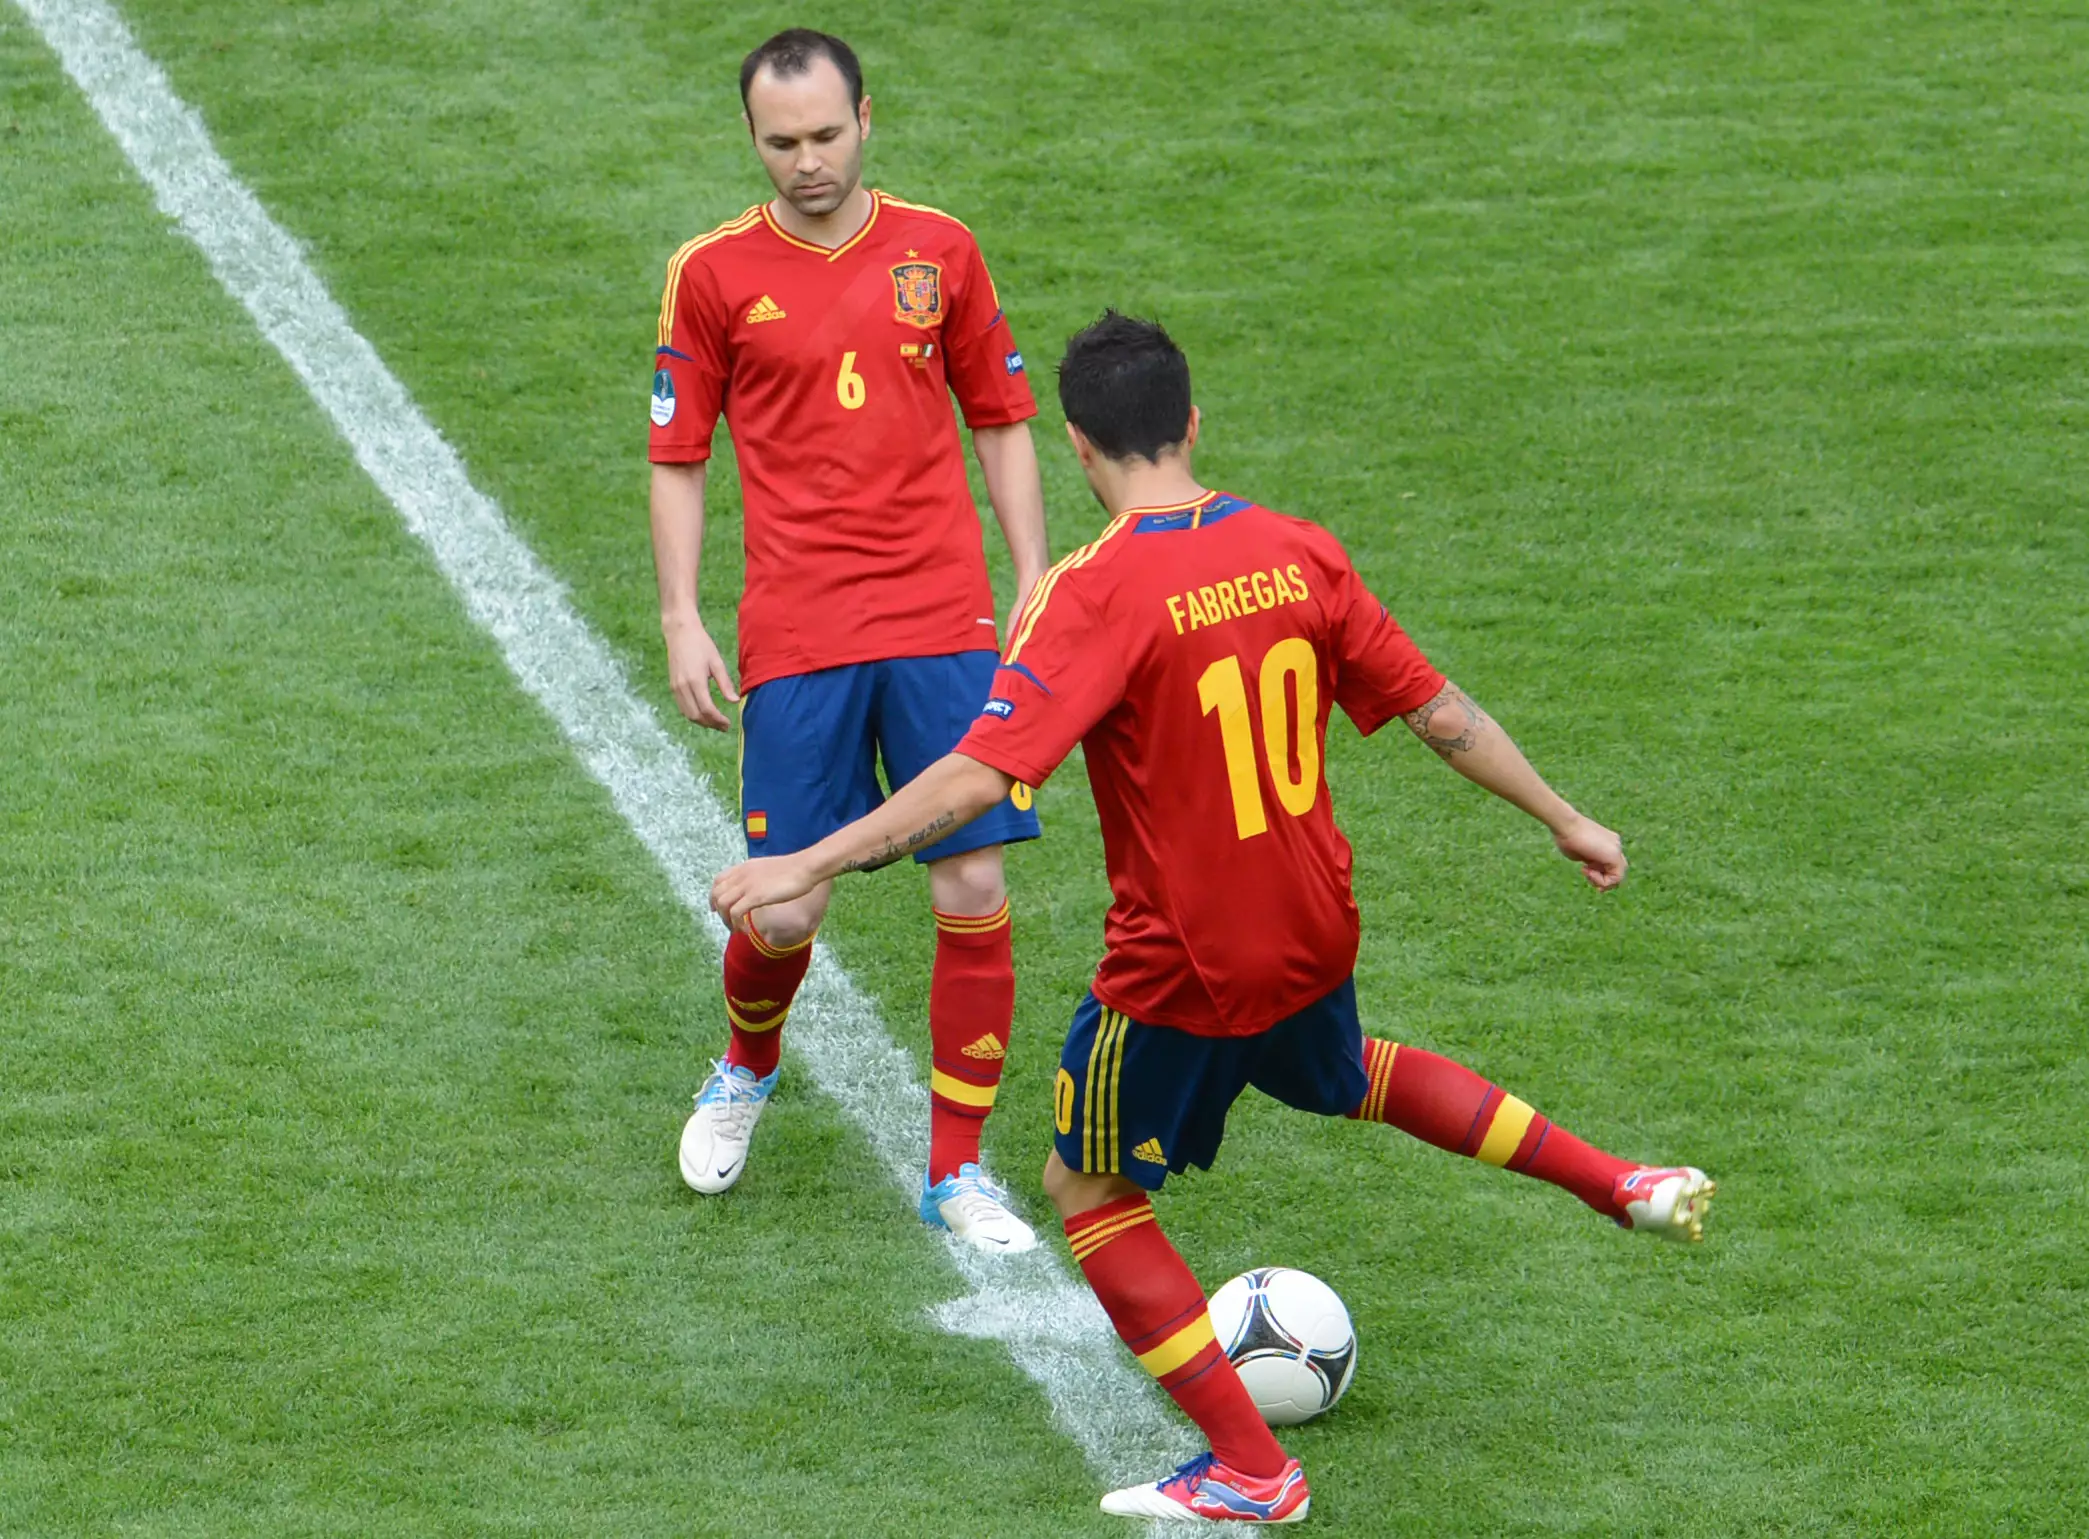 Fabregas and Iniesta playing together for Spain. Image: PA Images